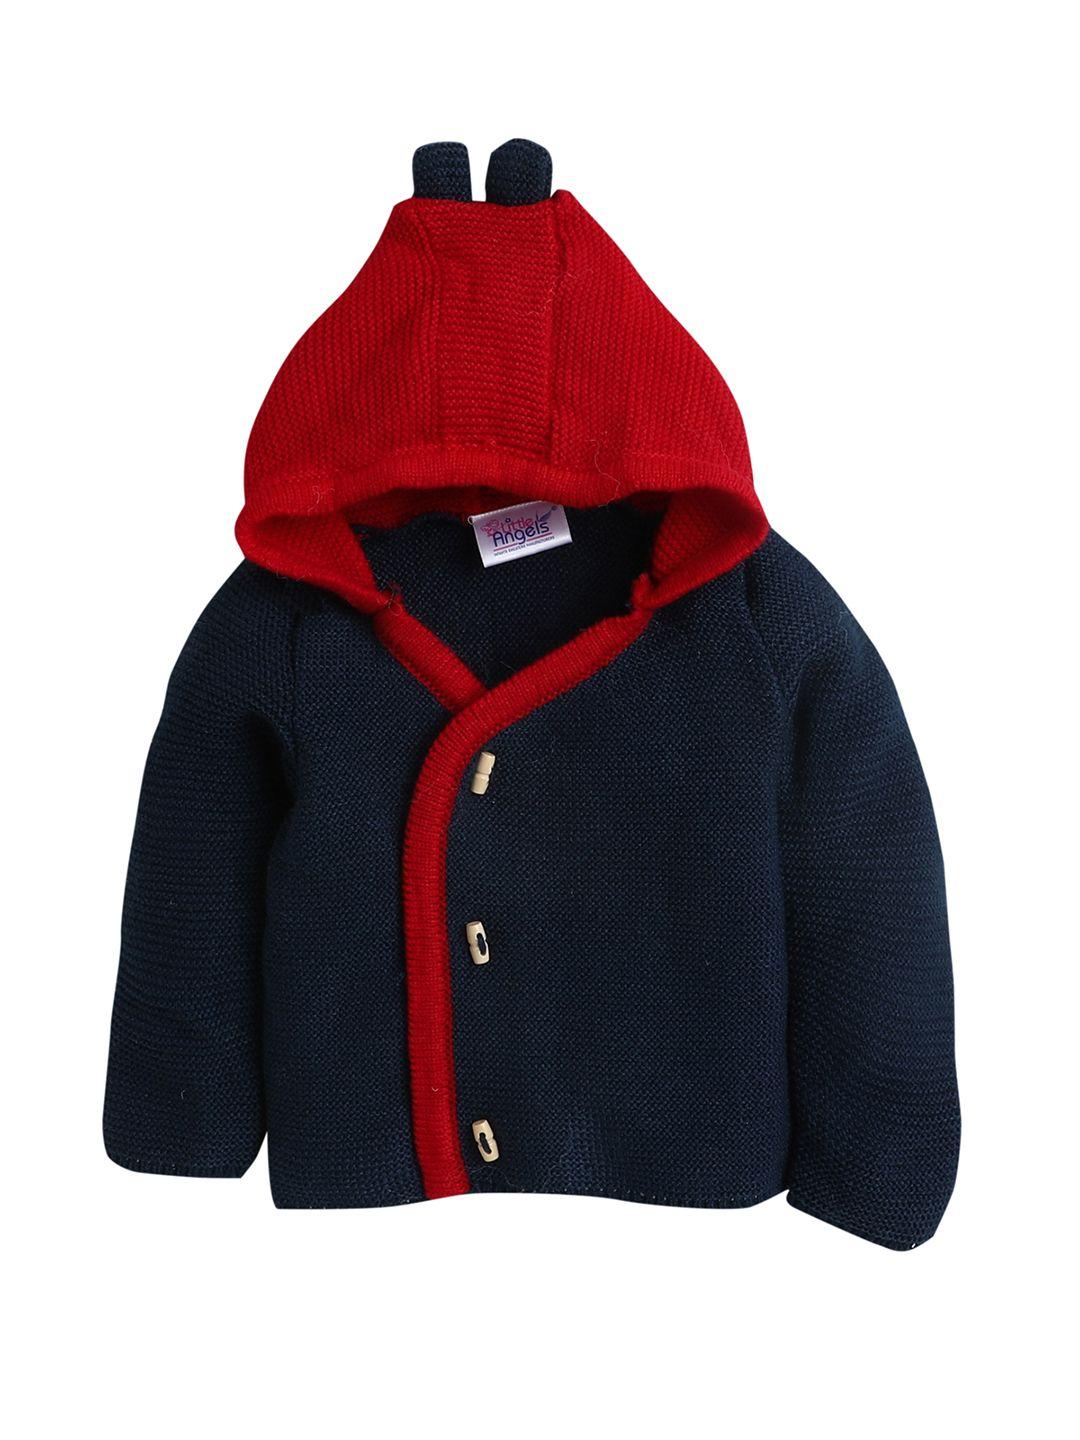 little angels kids navy blue & red colourblocked hooded cardigan sweater